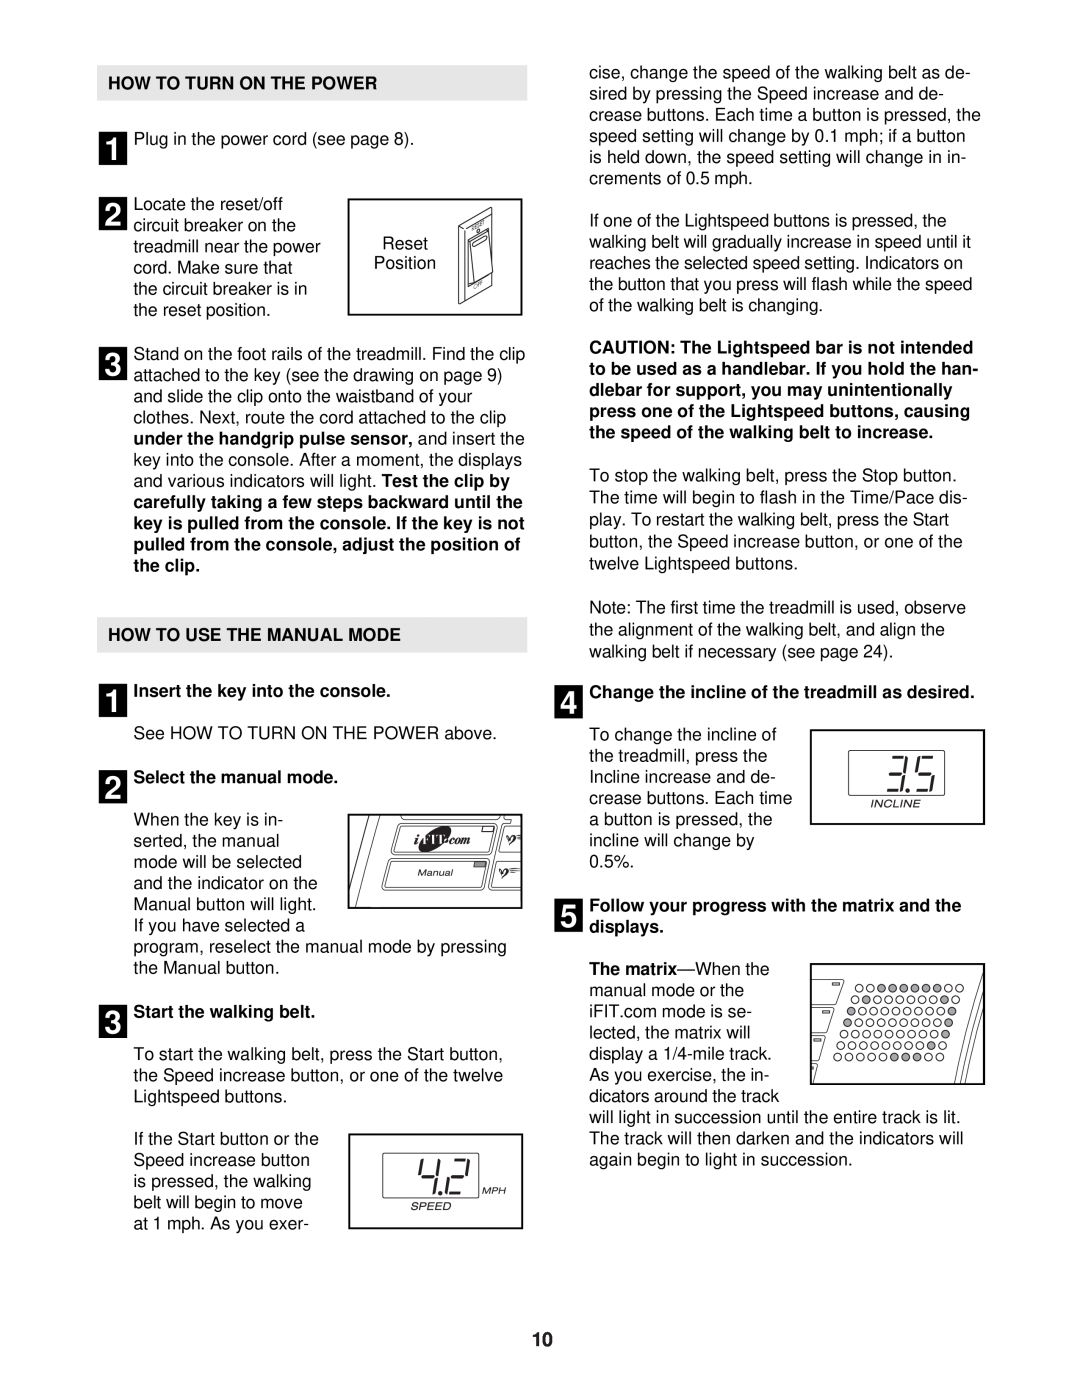 ProForm PFTL91330 user manual How To Turn On The Power, HOW TO USE THE MANUAL MODE 1 Insert the key into the console 